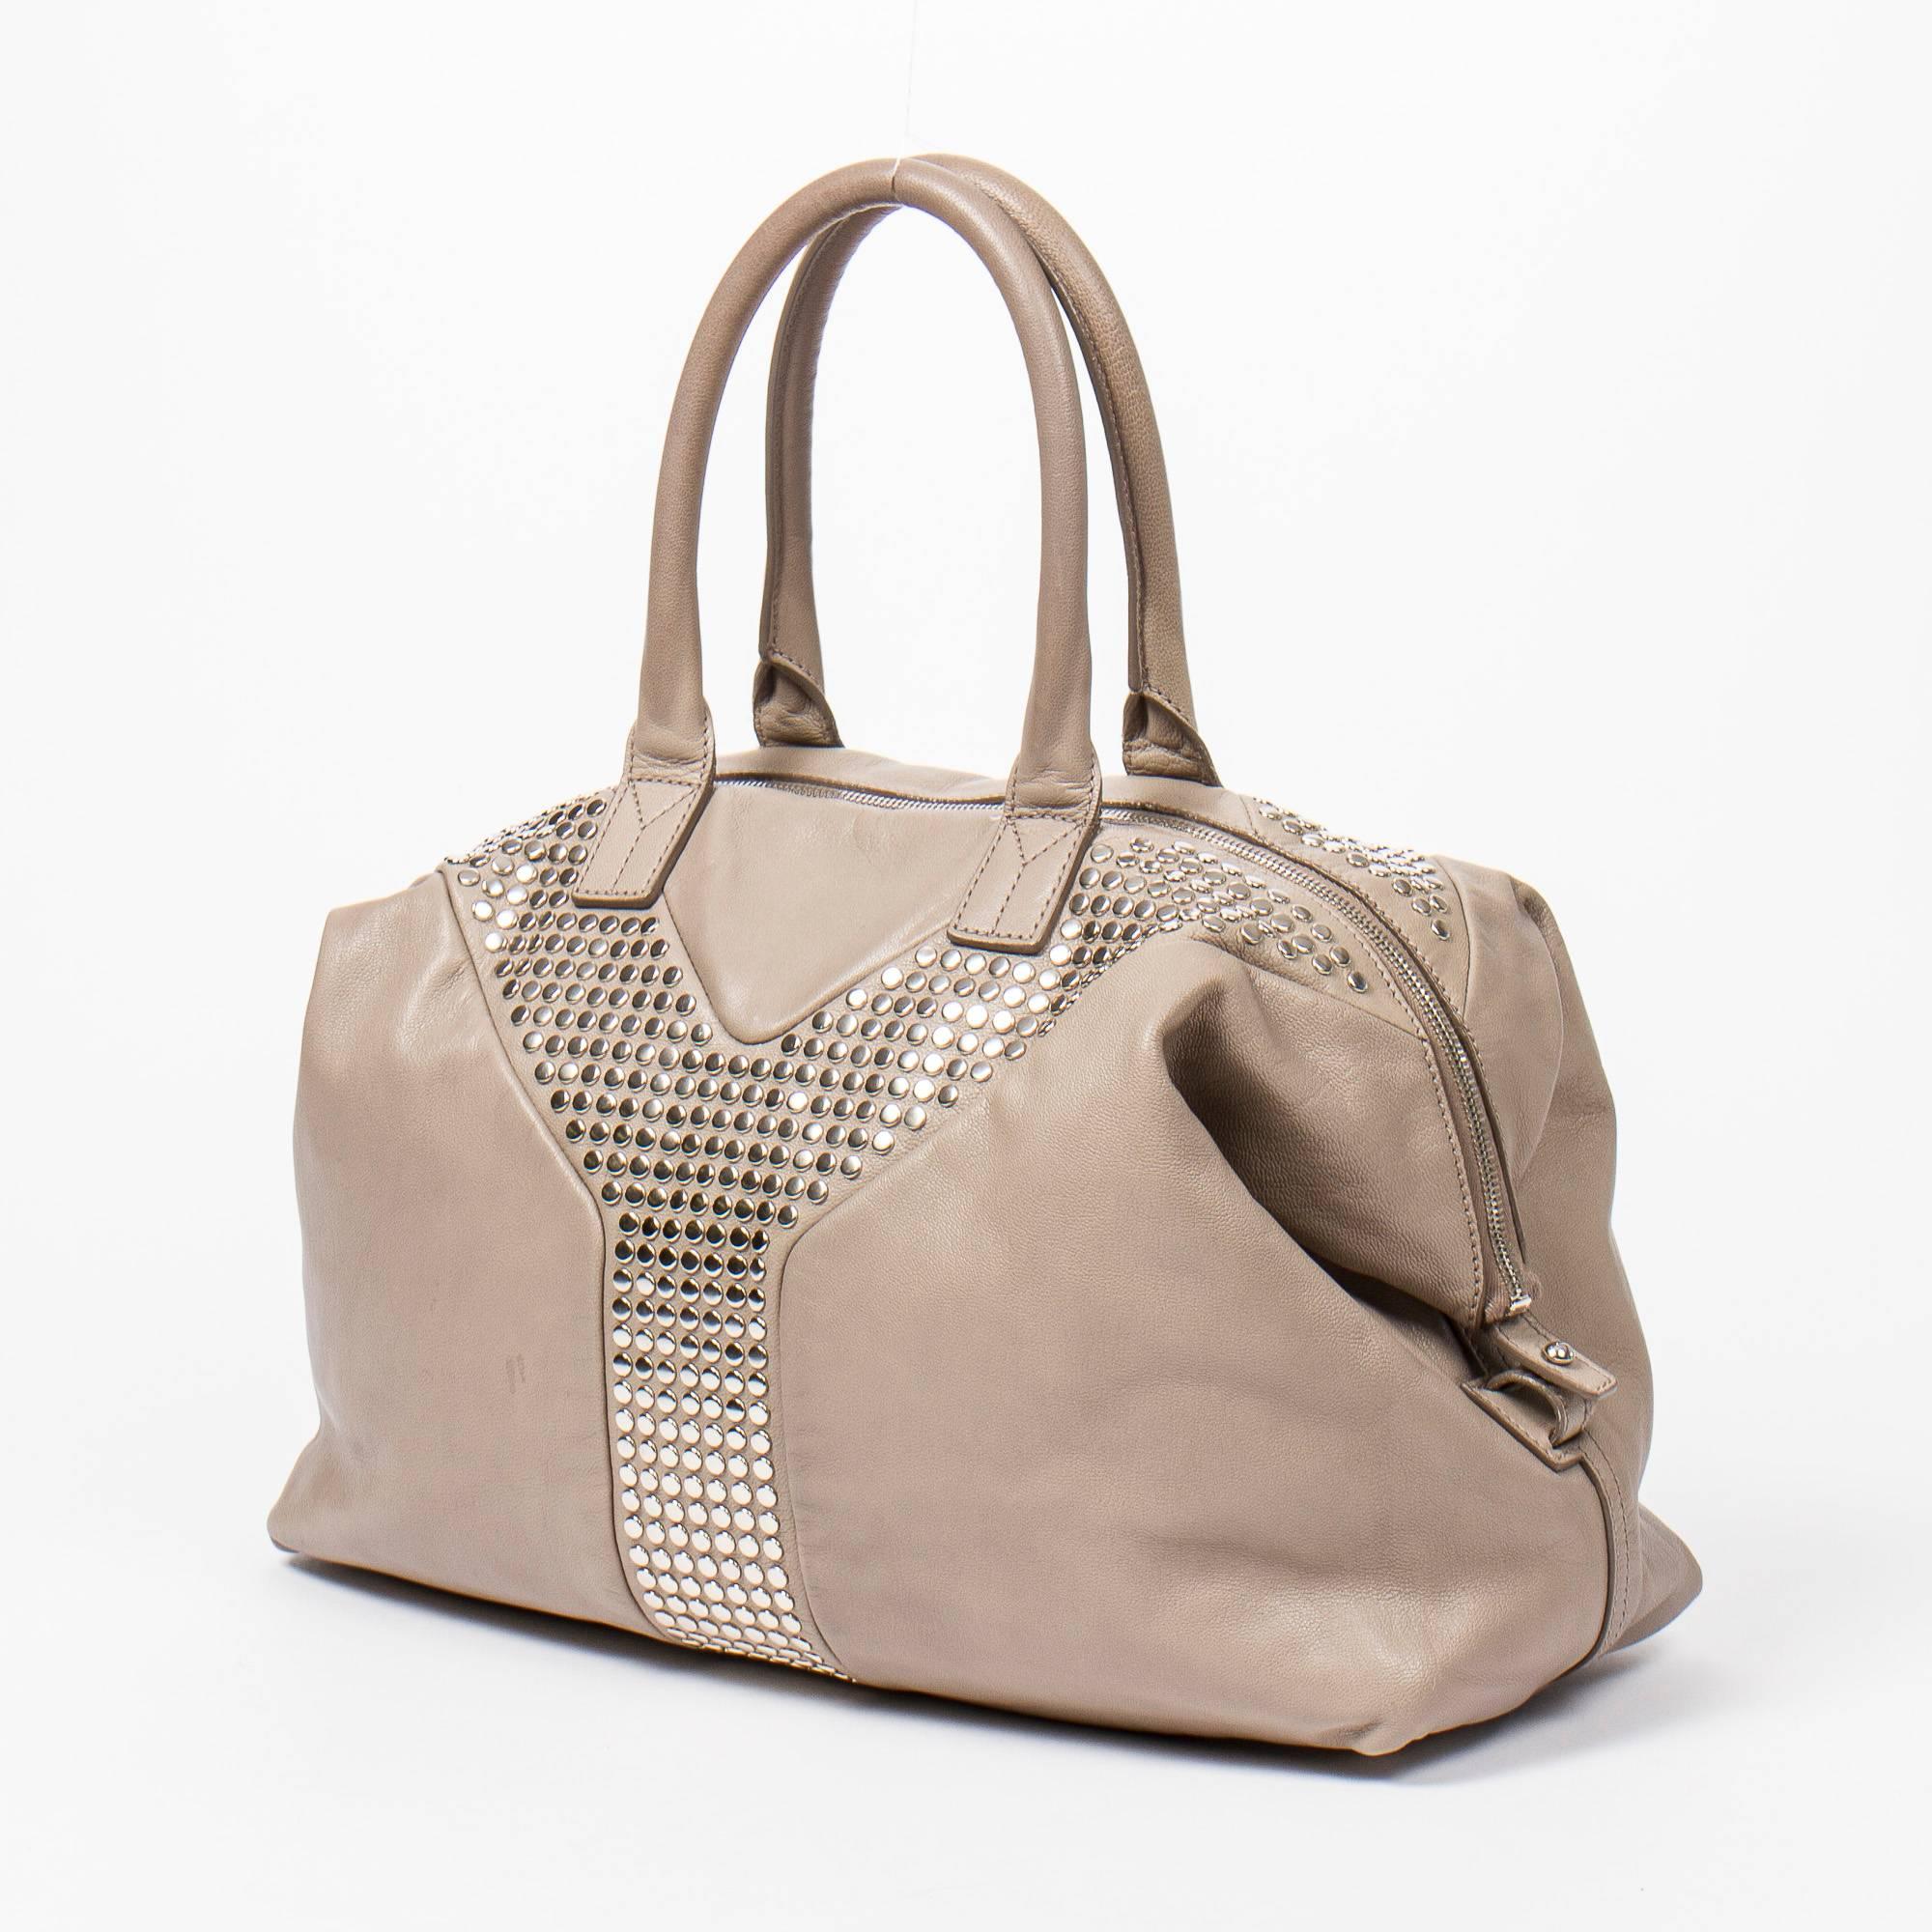 Yves Saint-Laurent Easy Studded MM in light grey small grained leather and silver hardware. Canvas lined wide inside pocket with a zip closure. Very good condition overall.